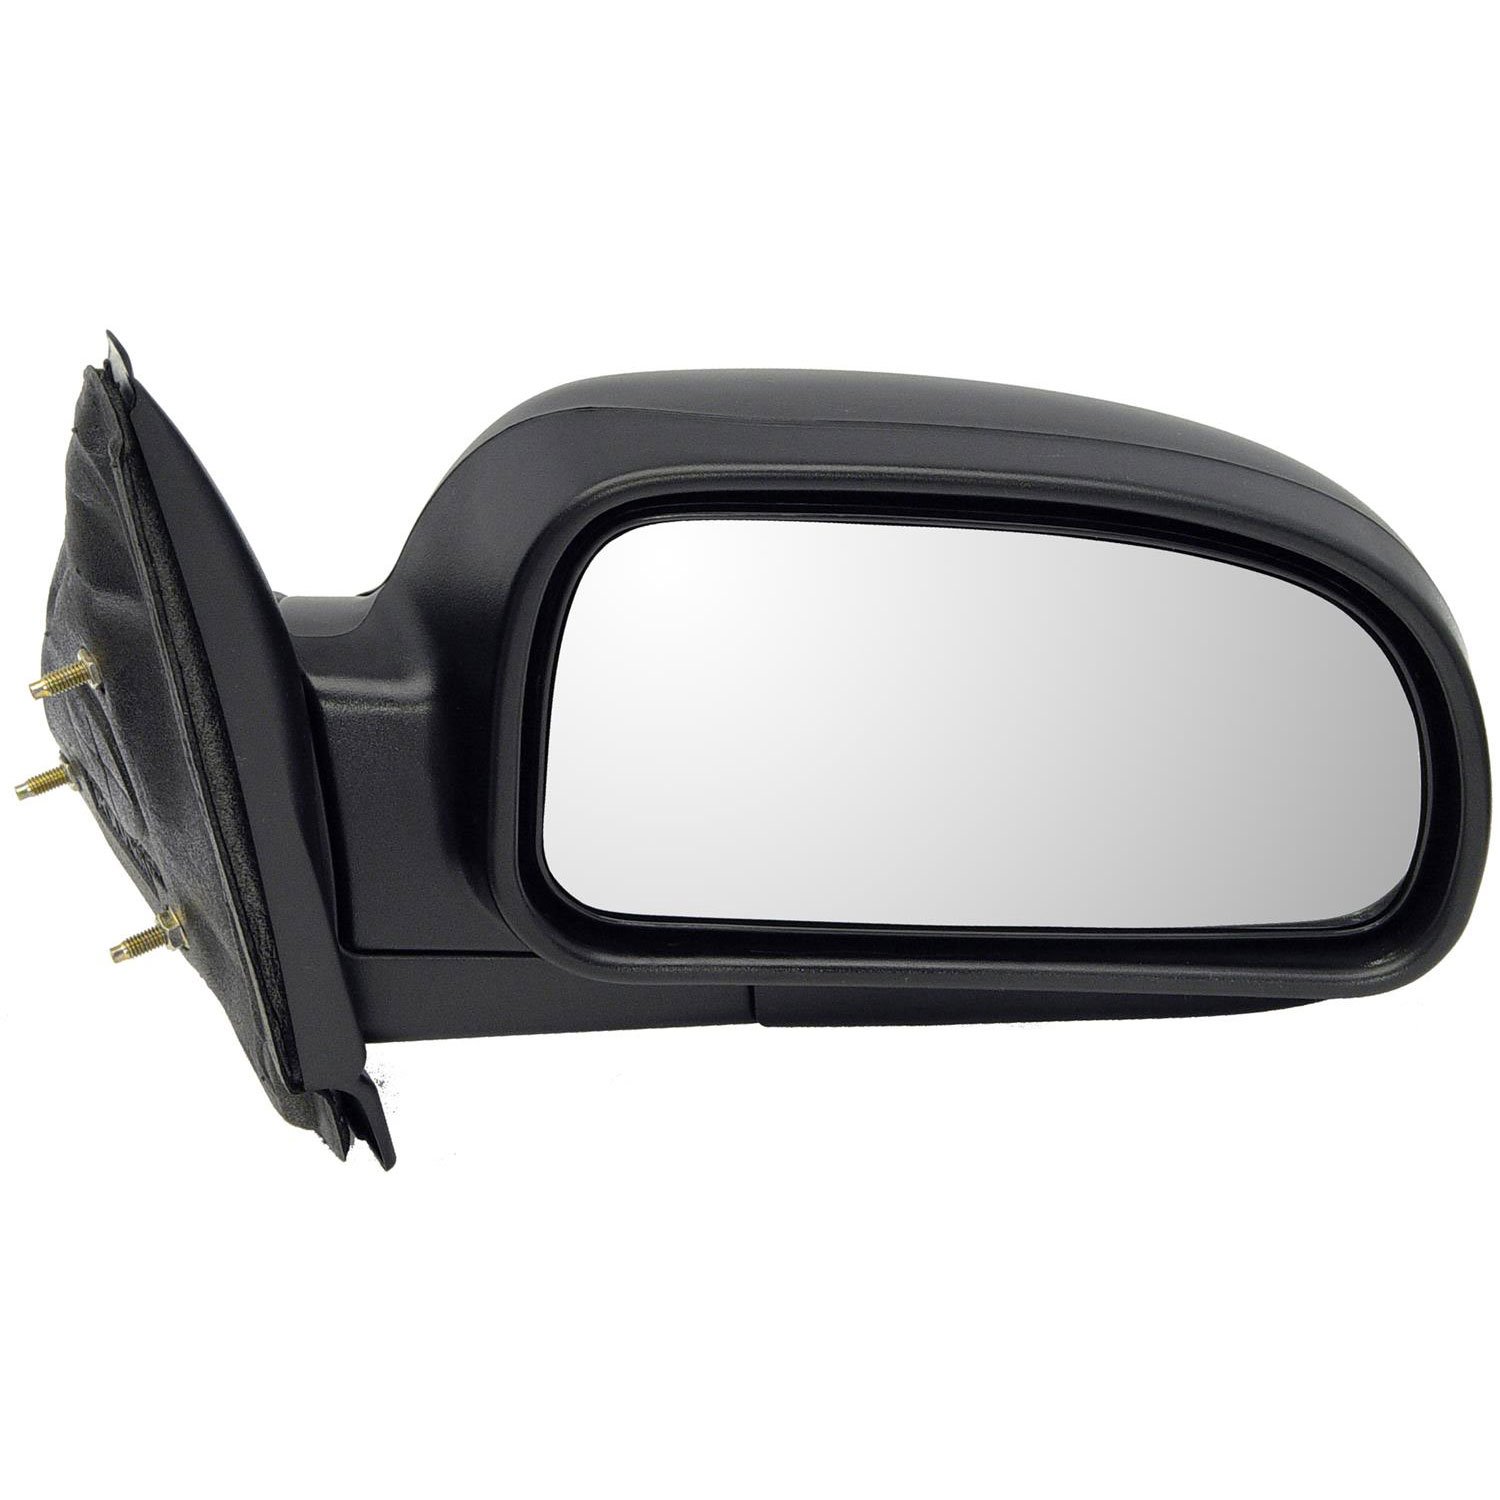 Side View Mirror Manual